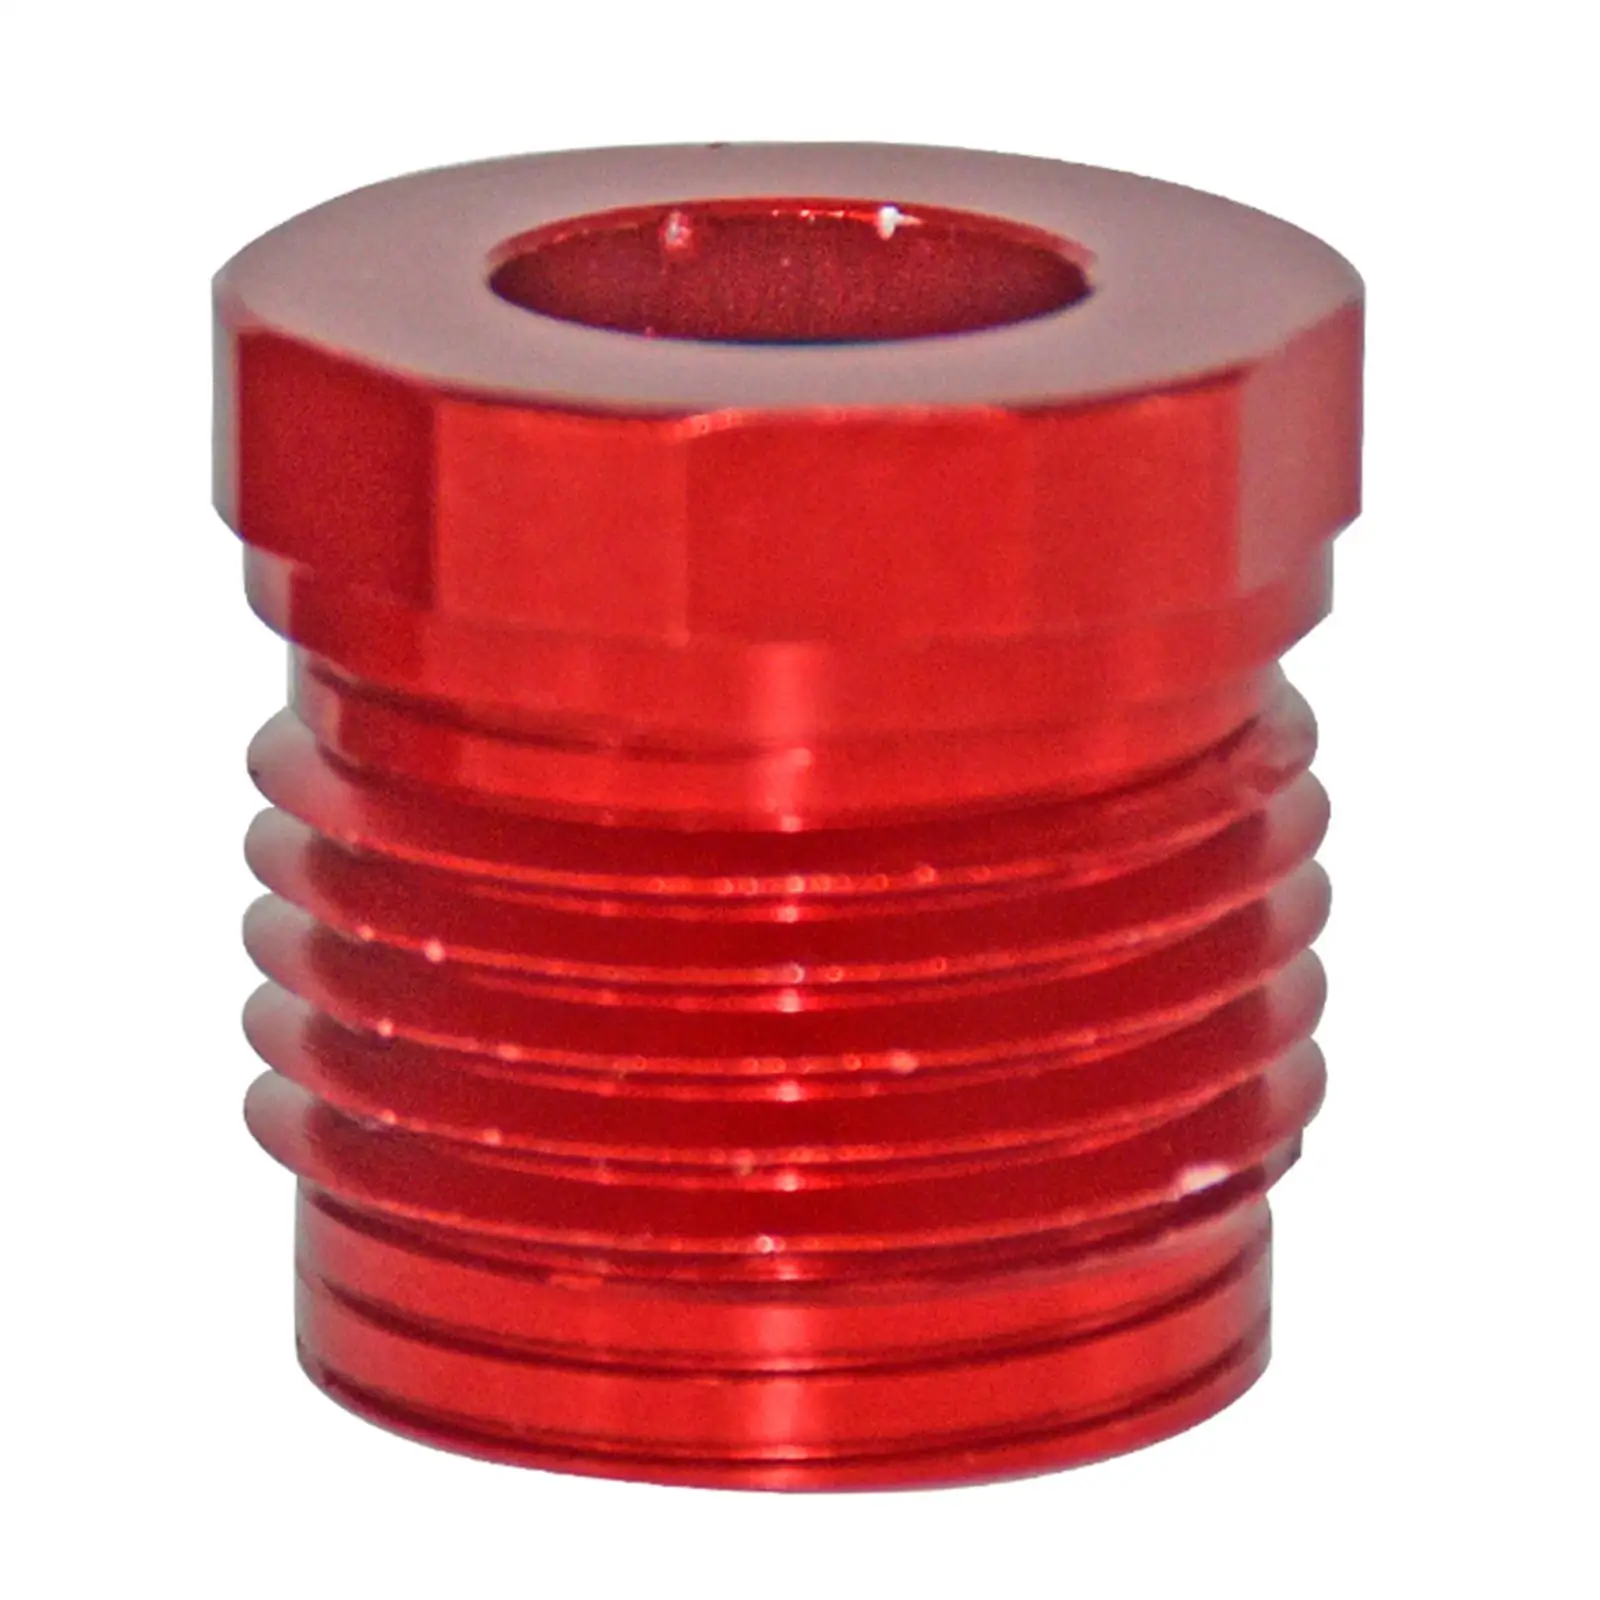 Steering and Reverse Cable Lock Nut Replaces Wear Resistant Aluminum Red Cable